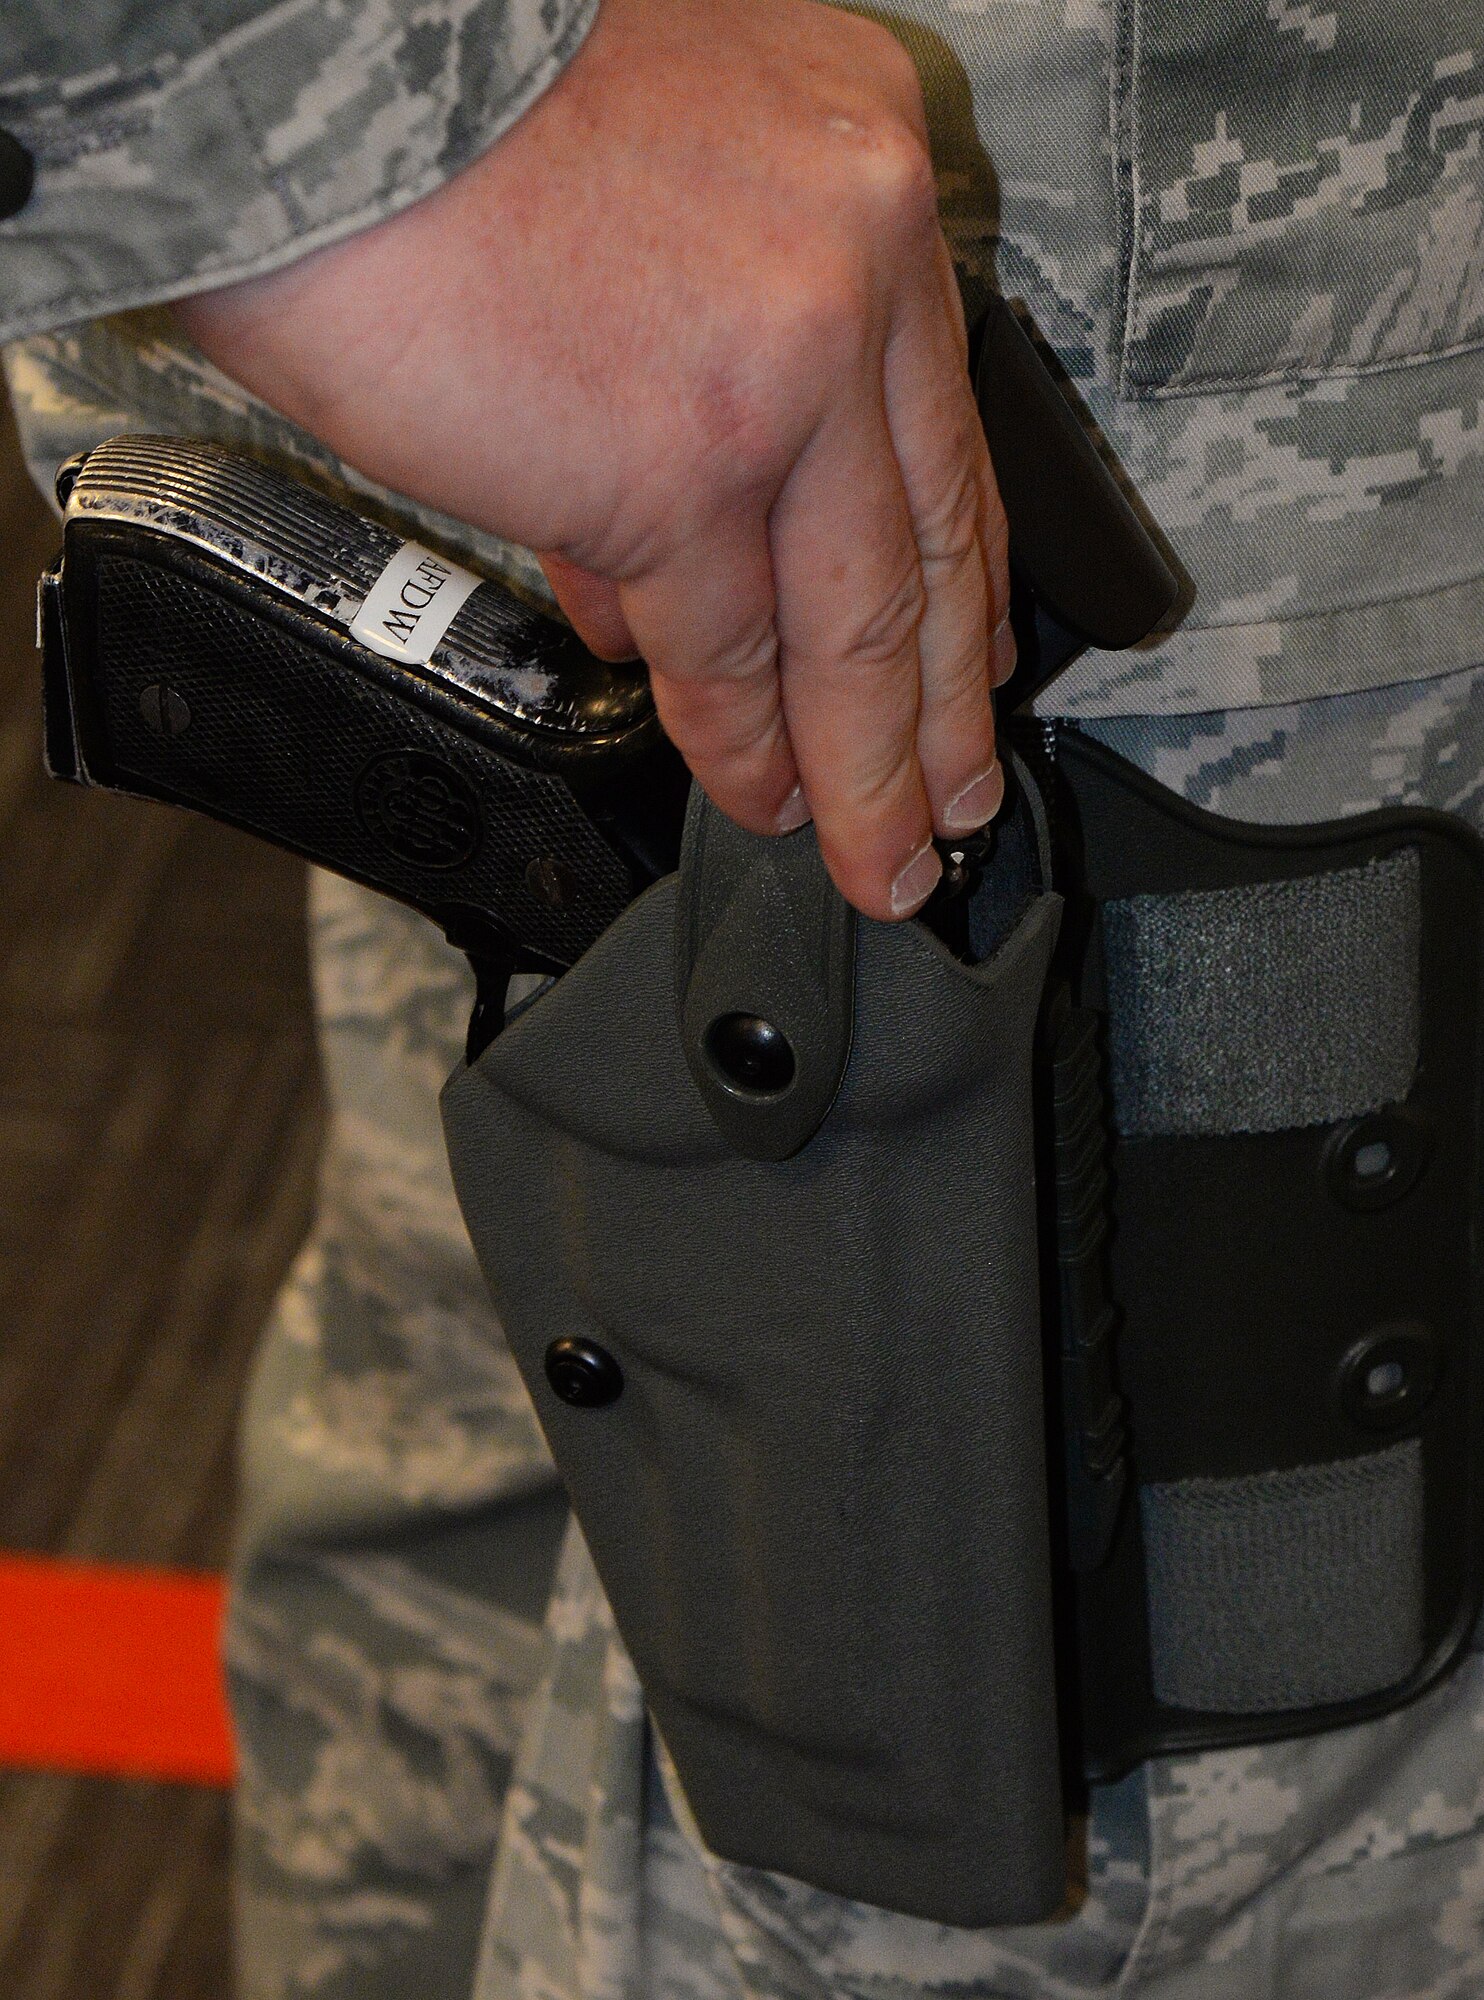 Master Sgt. Chris Romano, Air Force District of Washington Security Forces Plans and Programs Branch superintendent, is armed with an M9 service pistol at the William A. Jones III building on Joint Base Andrews, Md., Dec. 30, 2015. Staff arming allows AFDW personnel with a Security Forces background to be armed in the building while working in a staff position to prevent active shooter threats. (U.S. Air Force photo/1st Lt. Esther Willett)